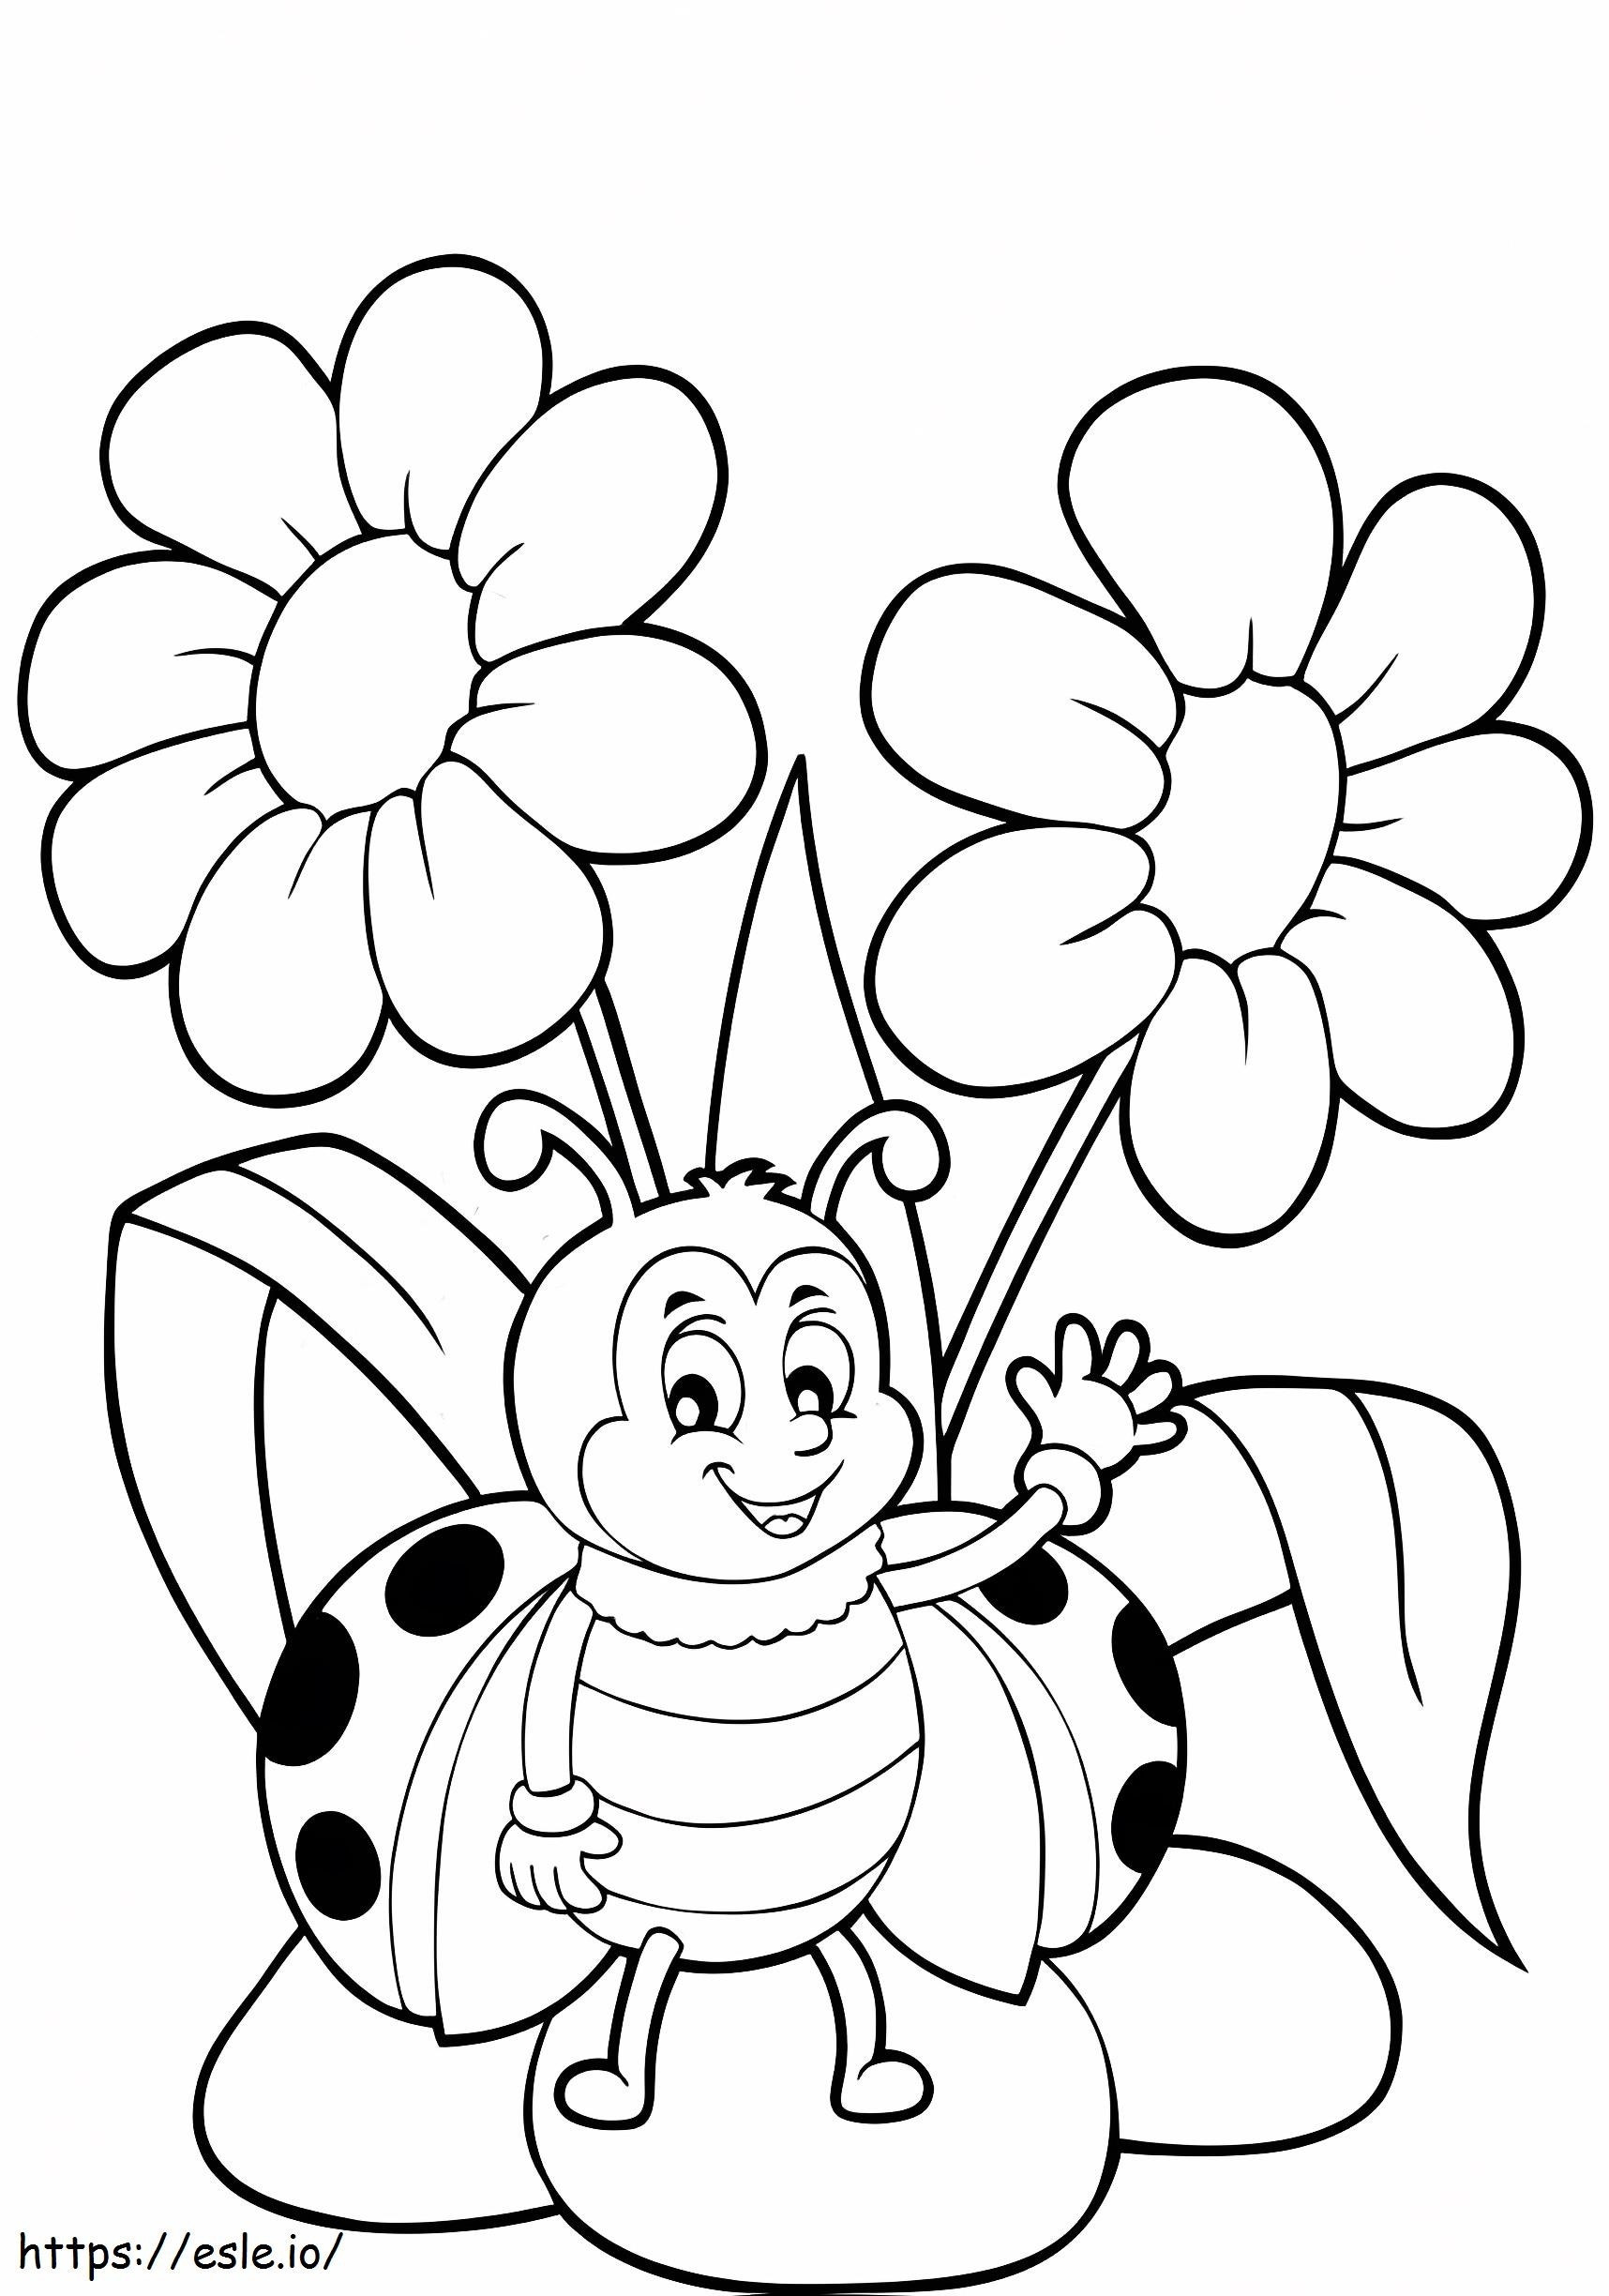 Funny Ladybug With Flower In Spring coloring page